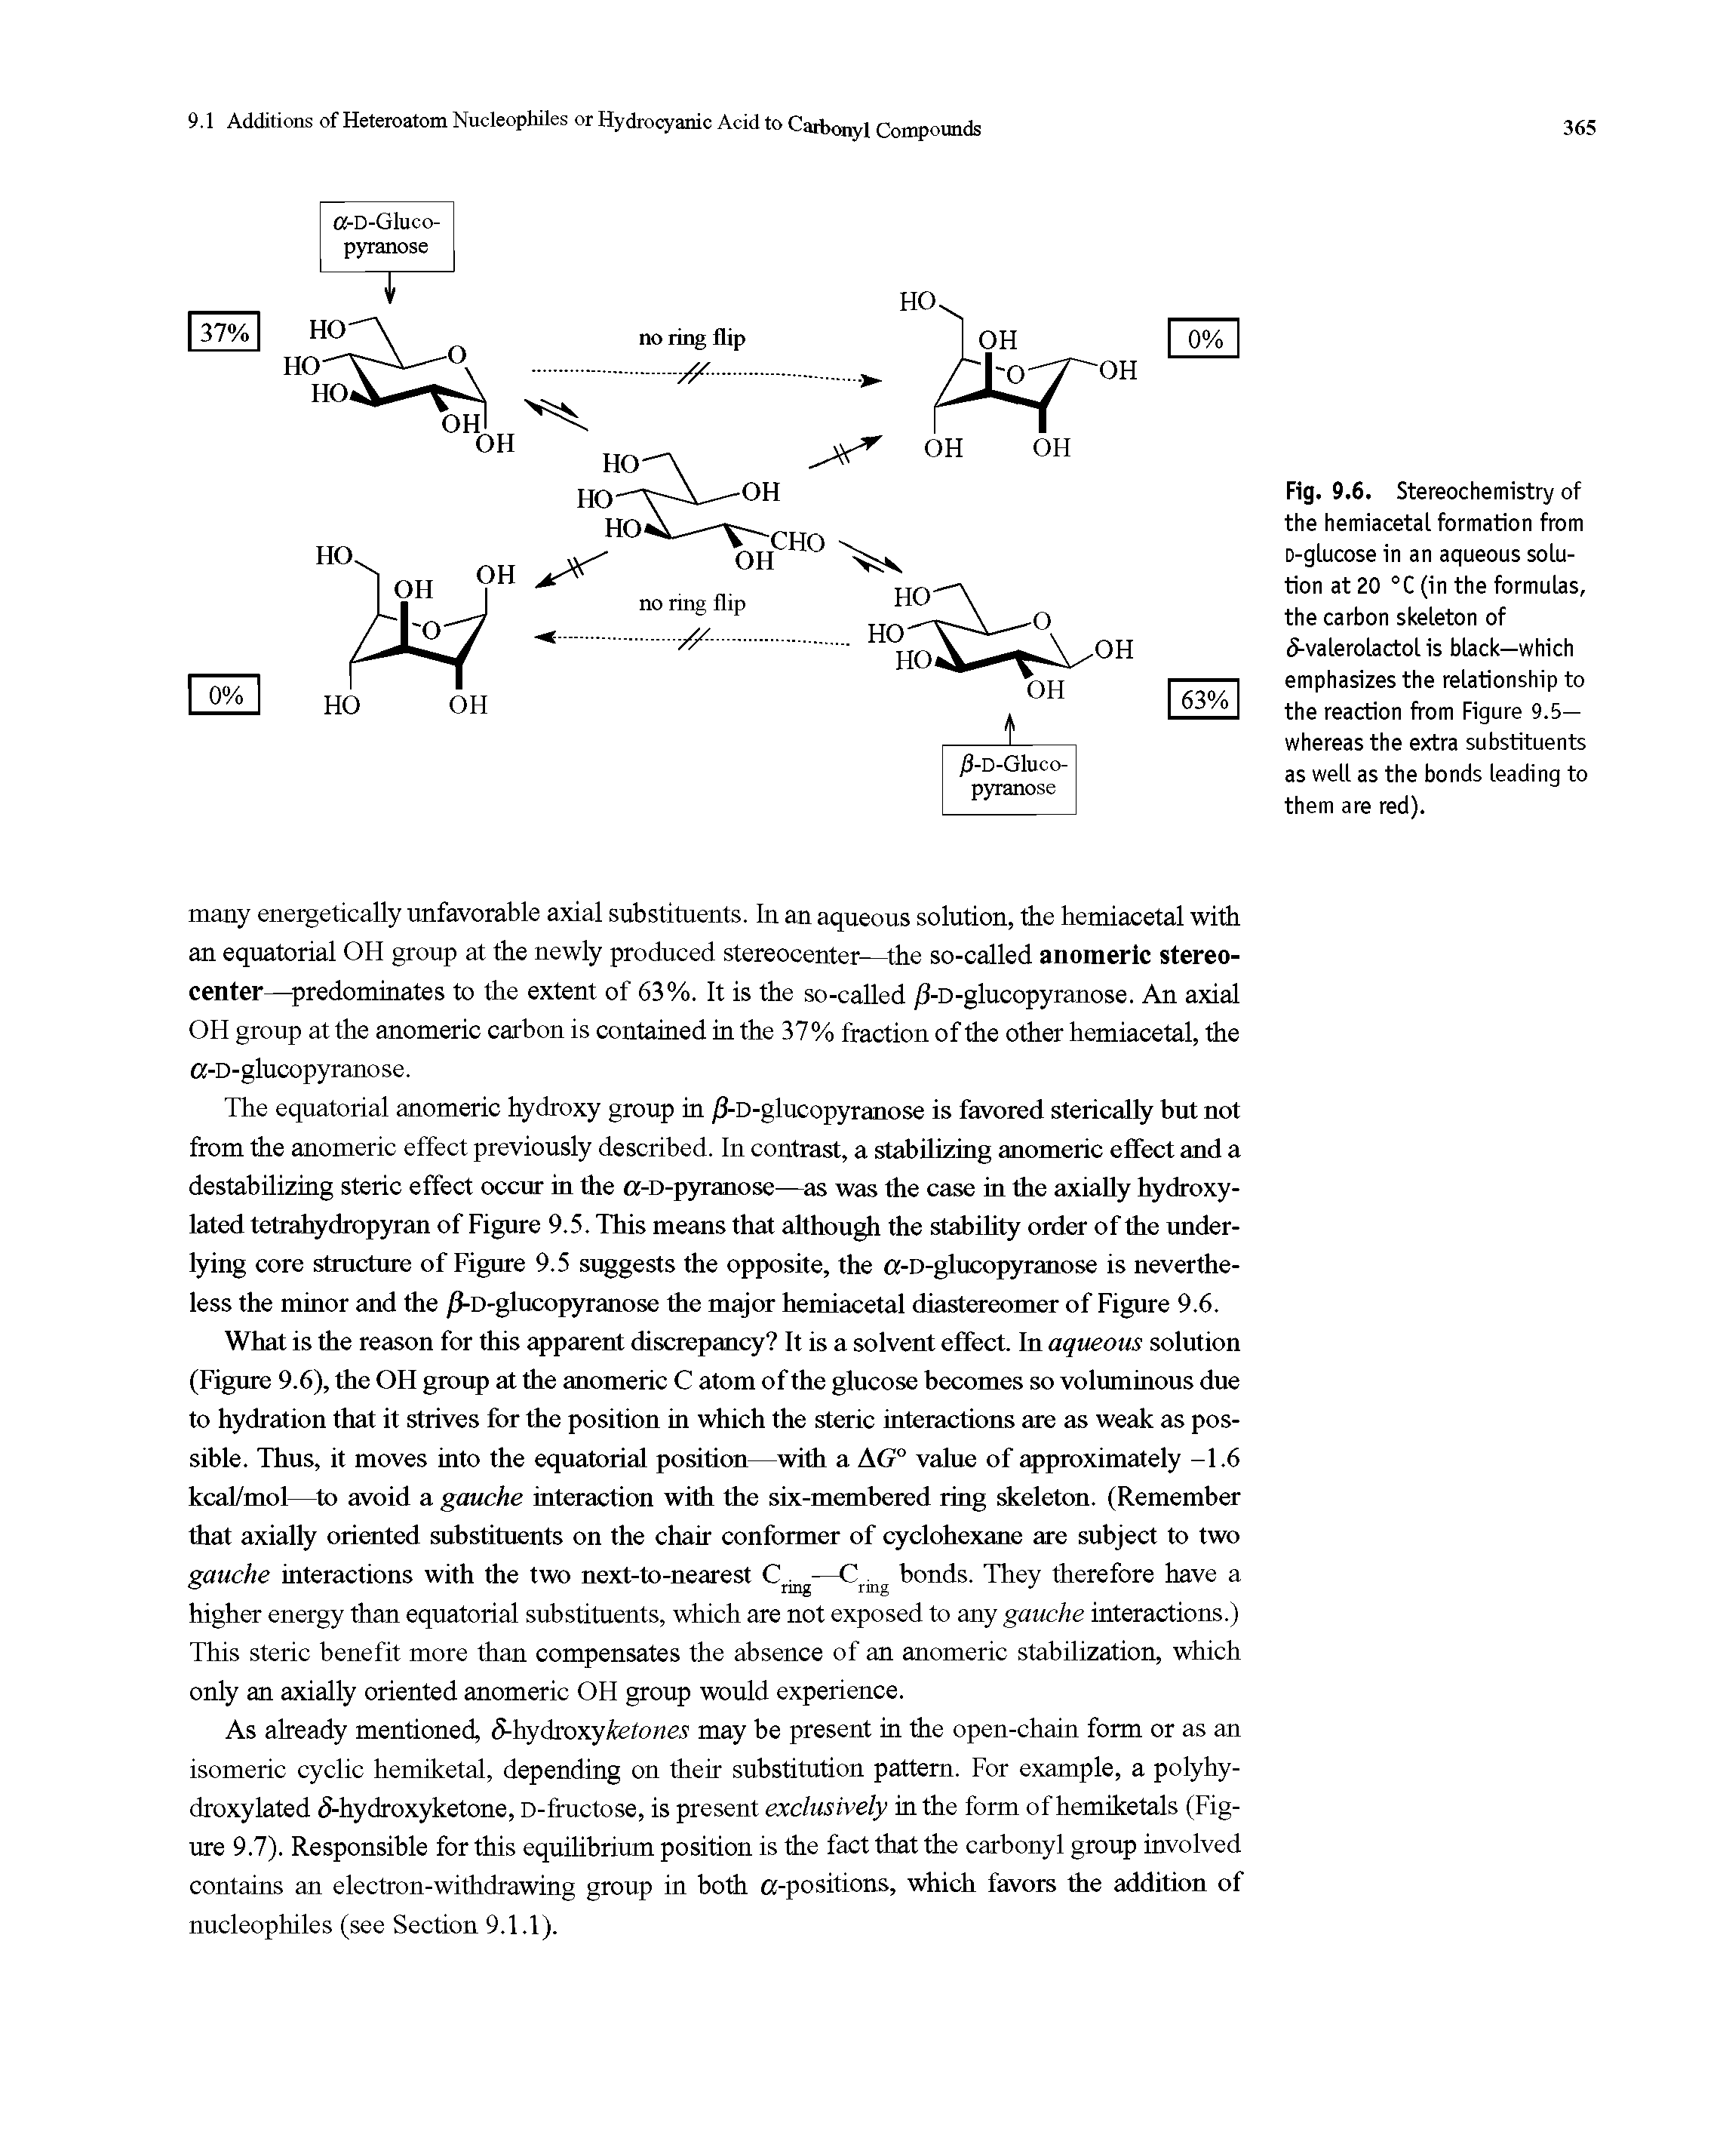 Fig. 9.6. Stereochemistry of the hemiacetal formation from D-glucose in an aqueous solution at 20 °C (in the formulas, the carbon skeleton of 5-valerolactol is black—which emphasizes the relationship to the reaction from Figure 9.5— whereas the extra substituents as well as the bonds leading to them are red).